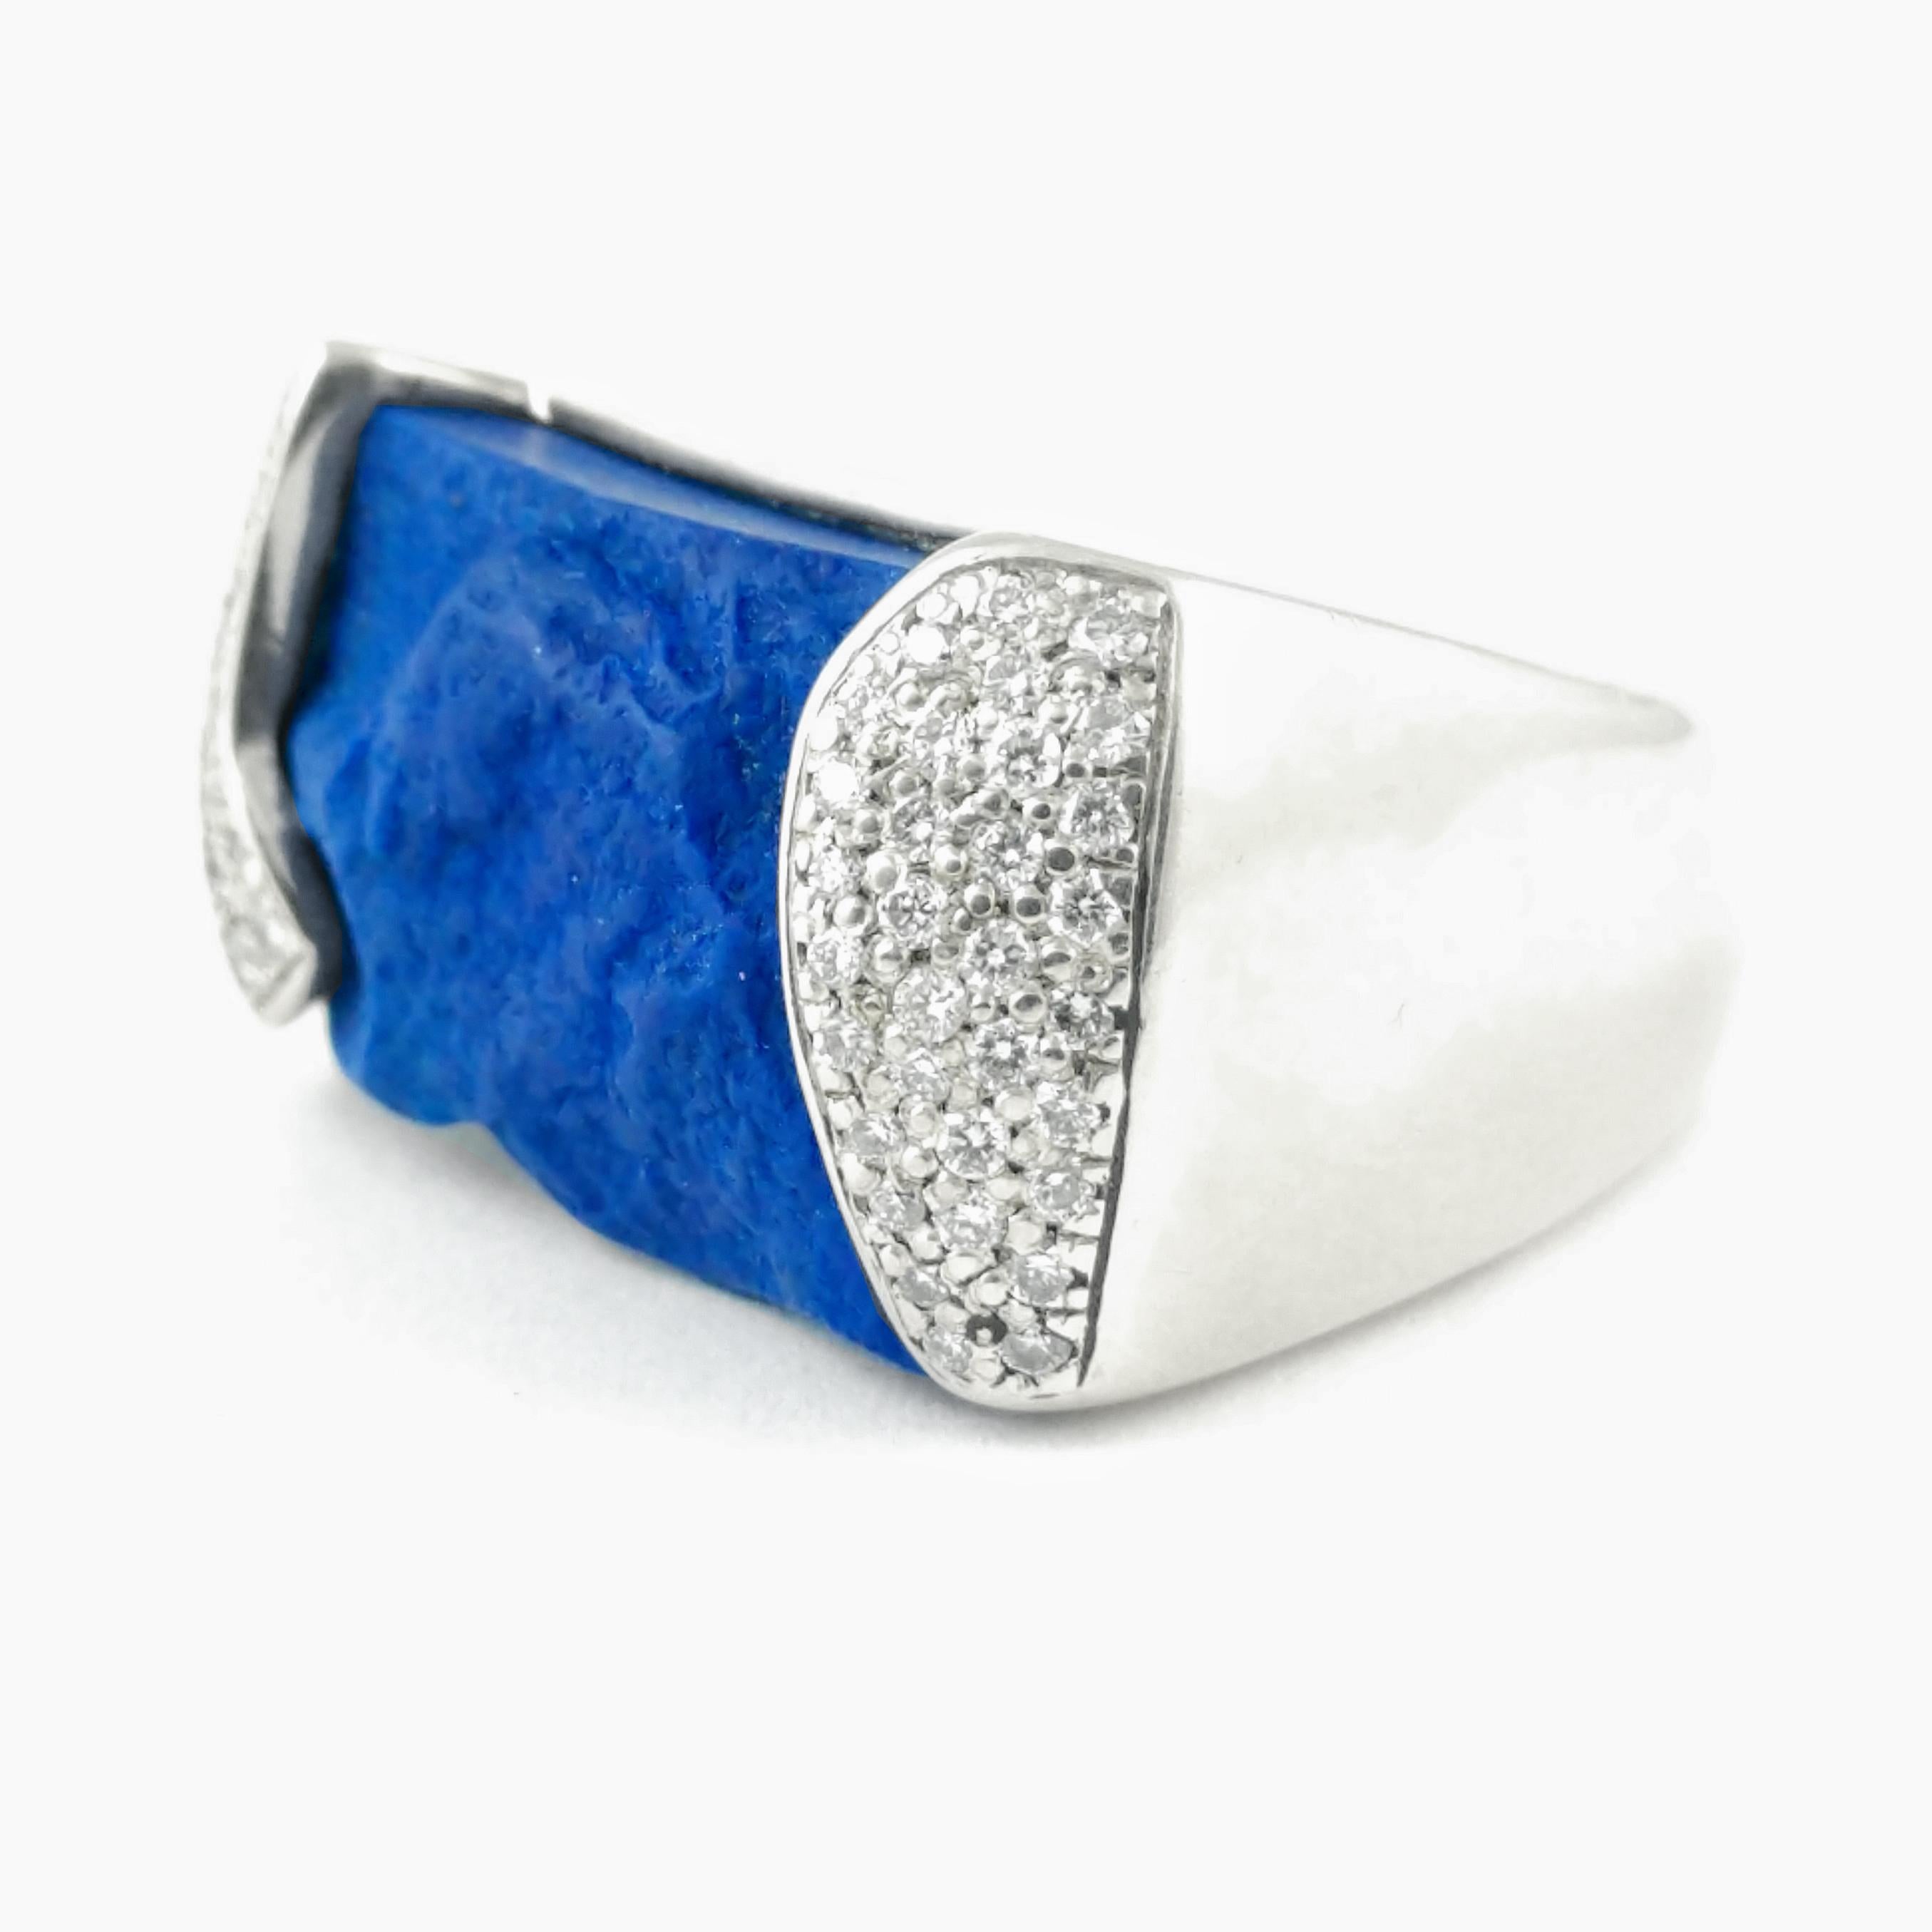 This Cornelis Hollander western inspired ring features a lapis gemstone that is left rough to give it a rugged but elegant look. The lapis weighs 18.46 ct., accented with .36 ct. of G VS2 diamonds pave set on the sides of the ring's top. The finger